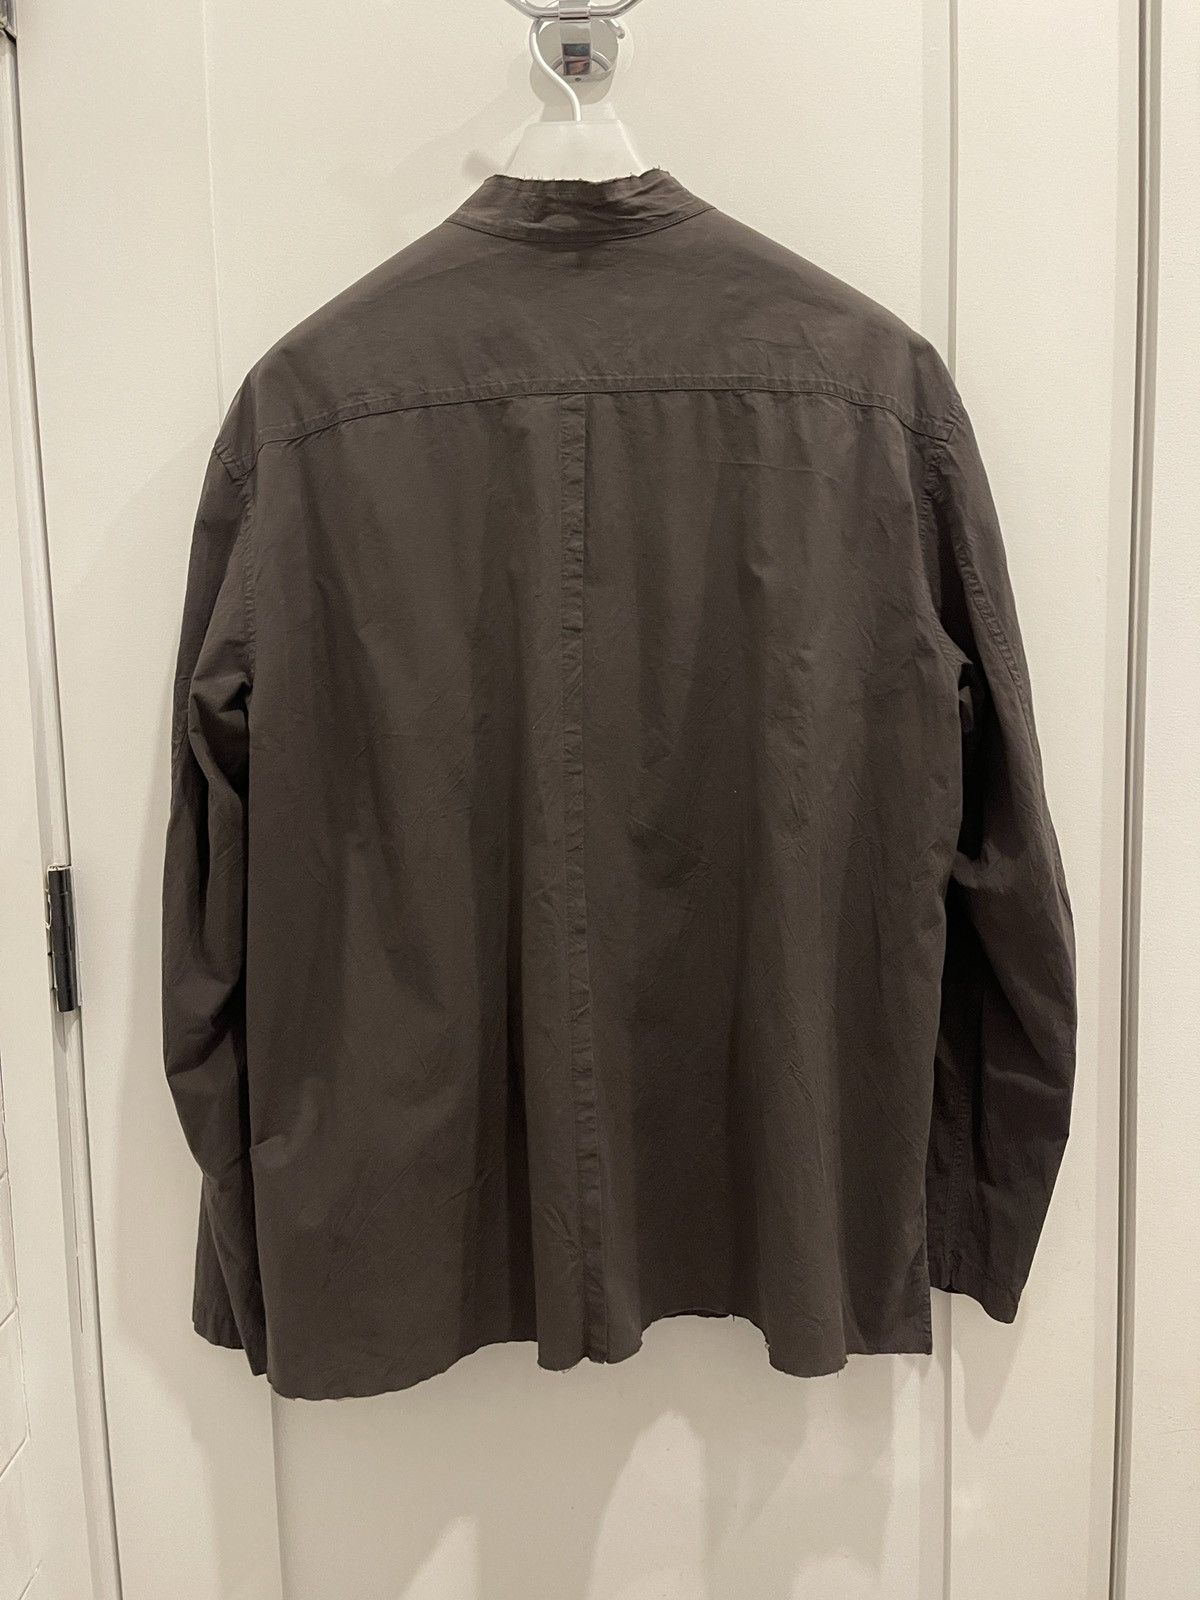 Issey Miyake Last Drop Vintage Raw Edge Stand Collar Overshirt Size US L / EU 52-54 / 3 - 9 Preview